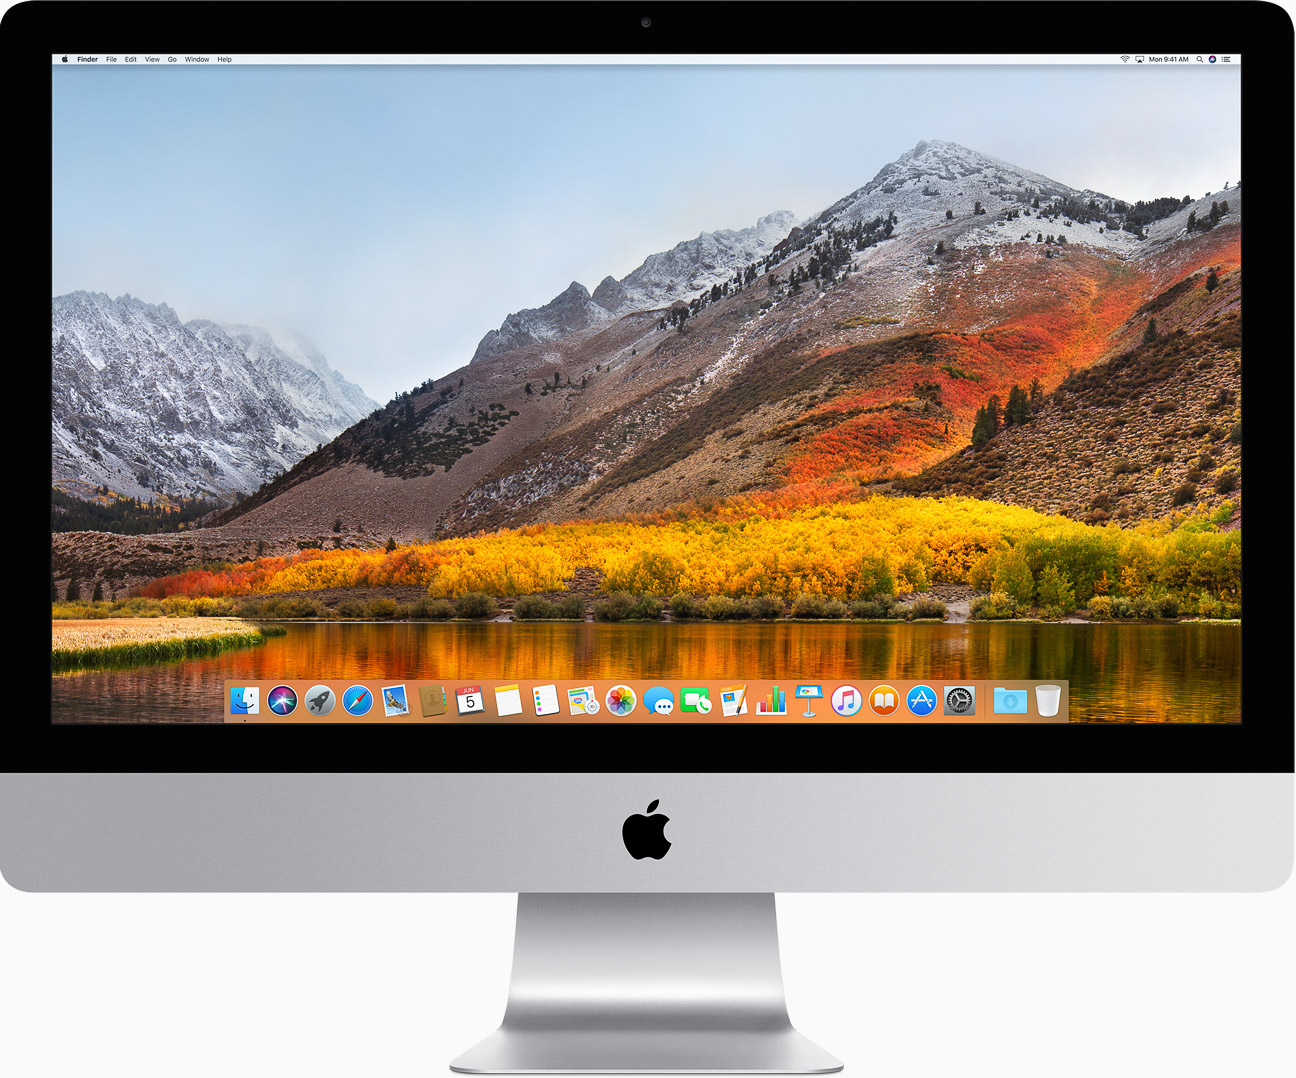 Free Creative Suite For Macos High Sierra 10.13.6